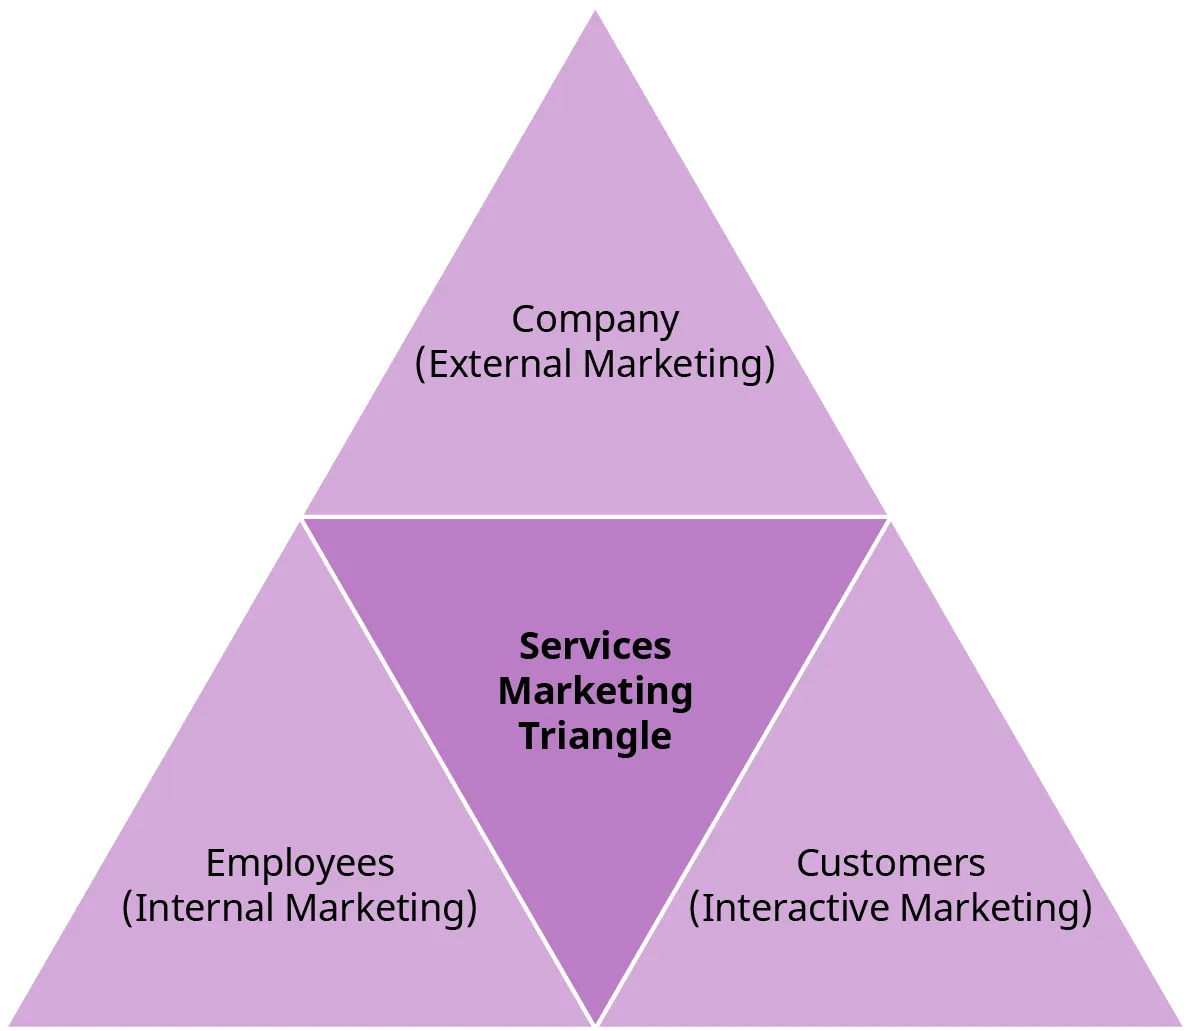 The services marketing triangle is divided into 4 equal sized triangles. In the center is the title Services Marketing Triangle. The top triangle is the company (external marketing). The bottom right is customers (interactive marketing). The bottom left is employees (internal marketing).